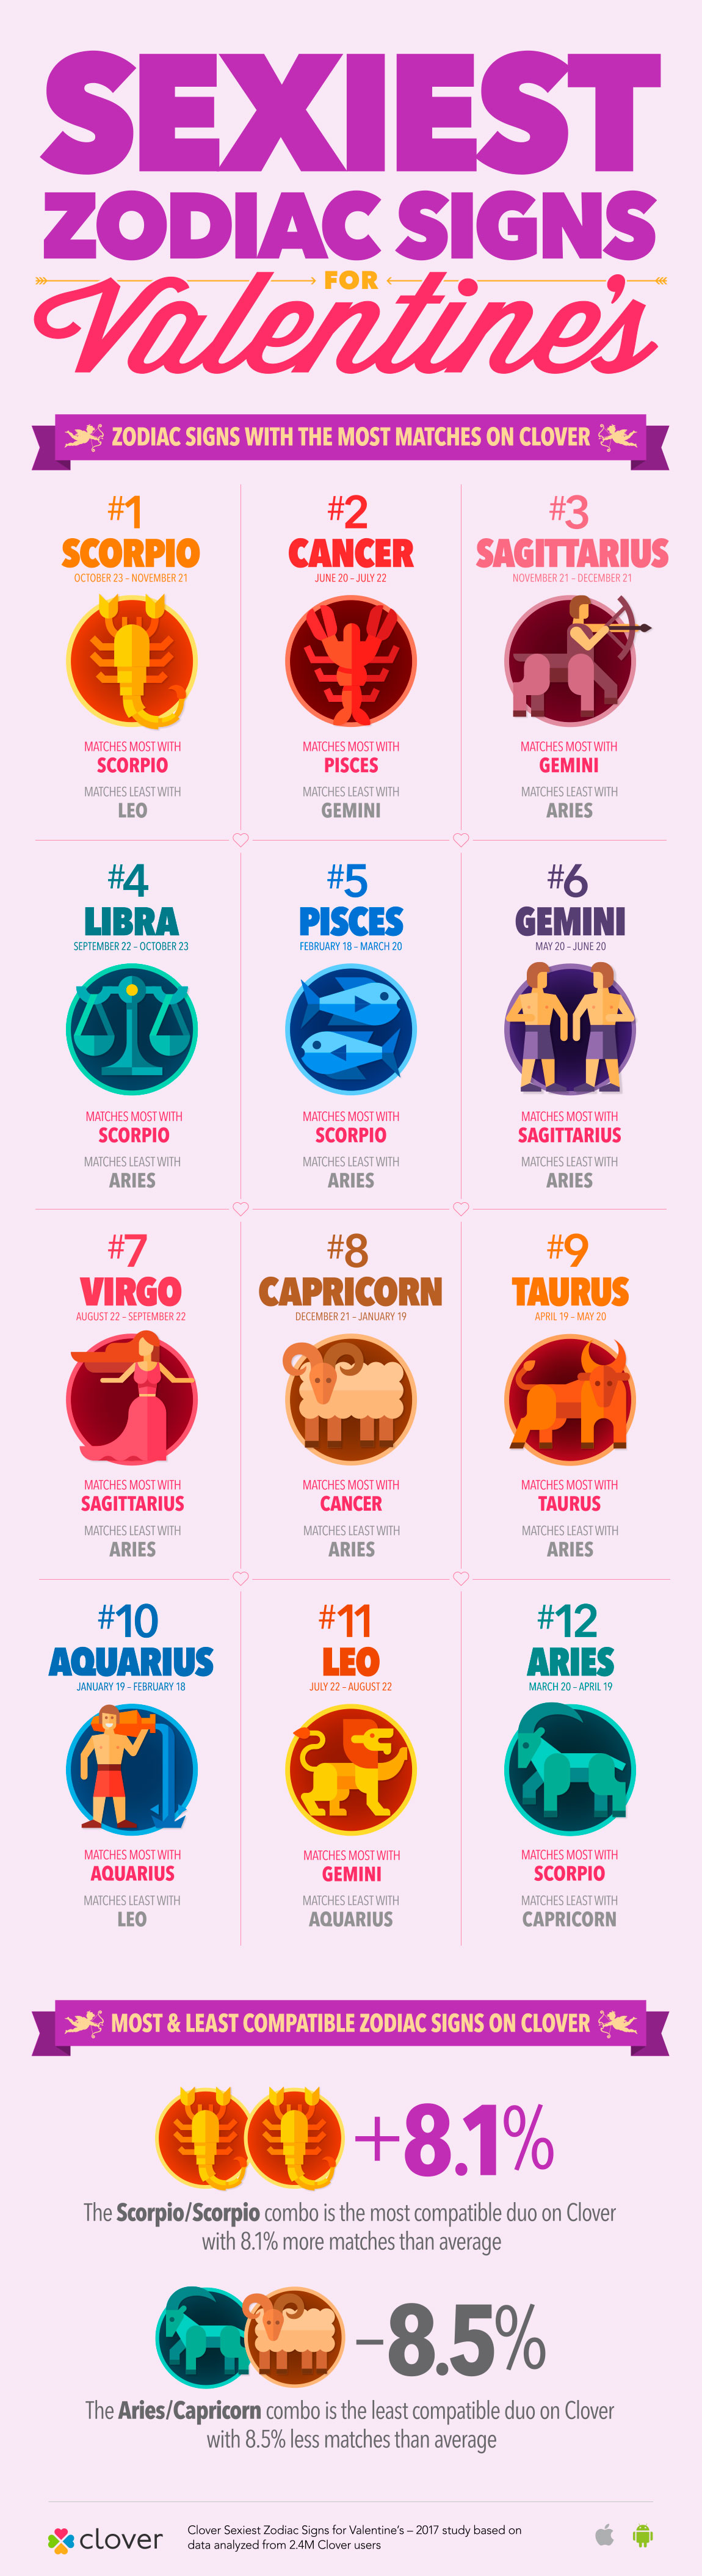 Sexiest Zodiac Signs For Valentine's